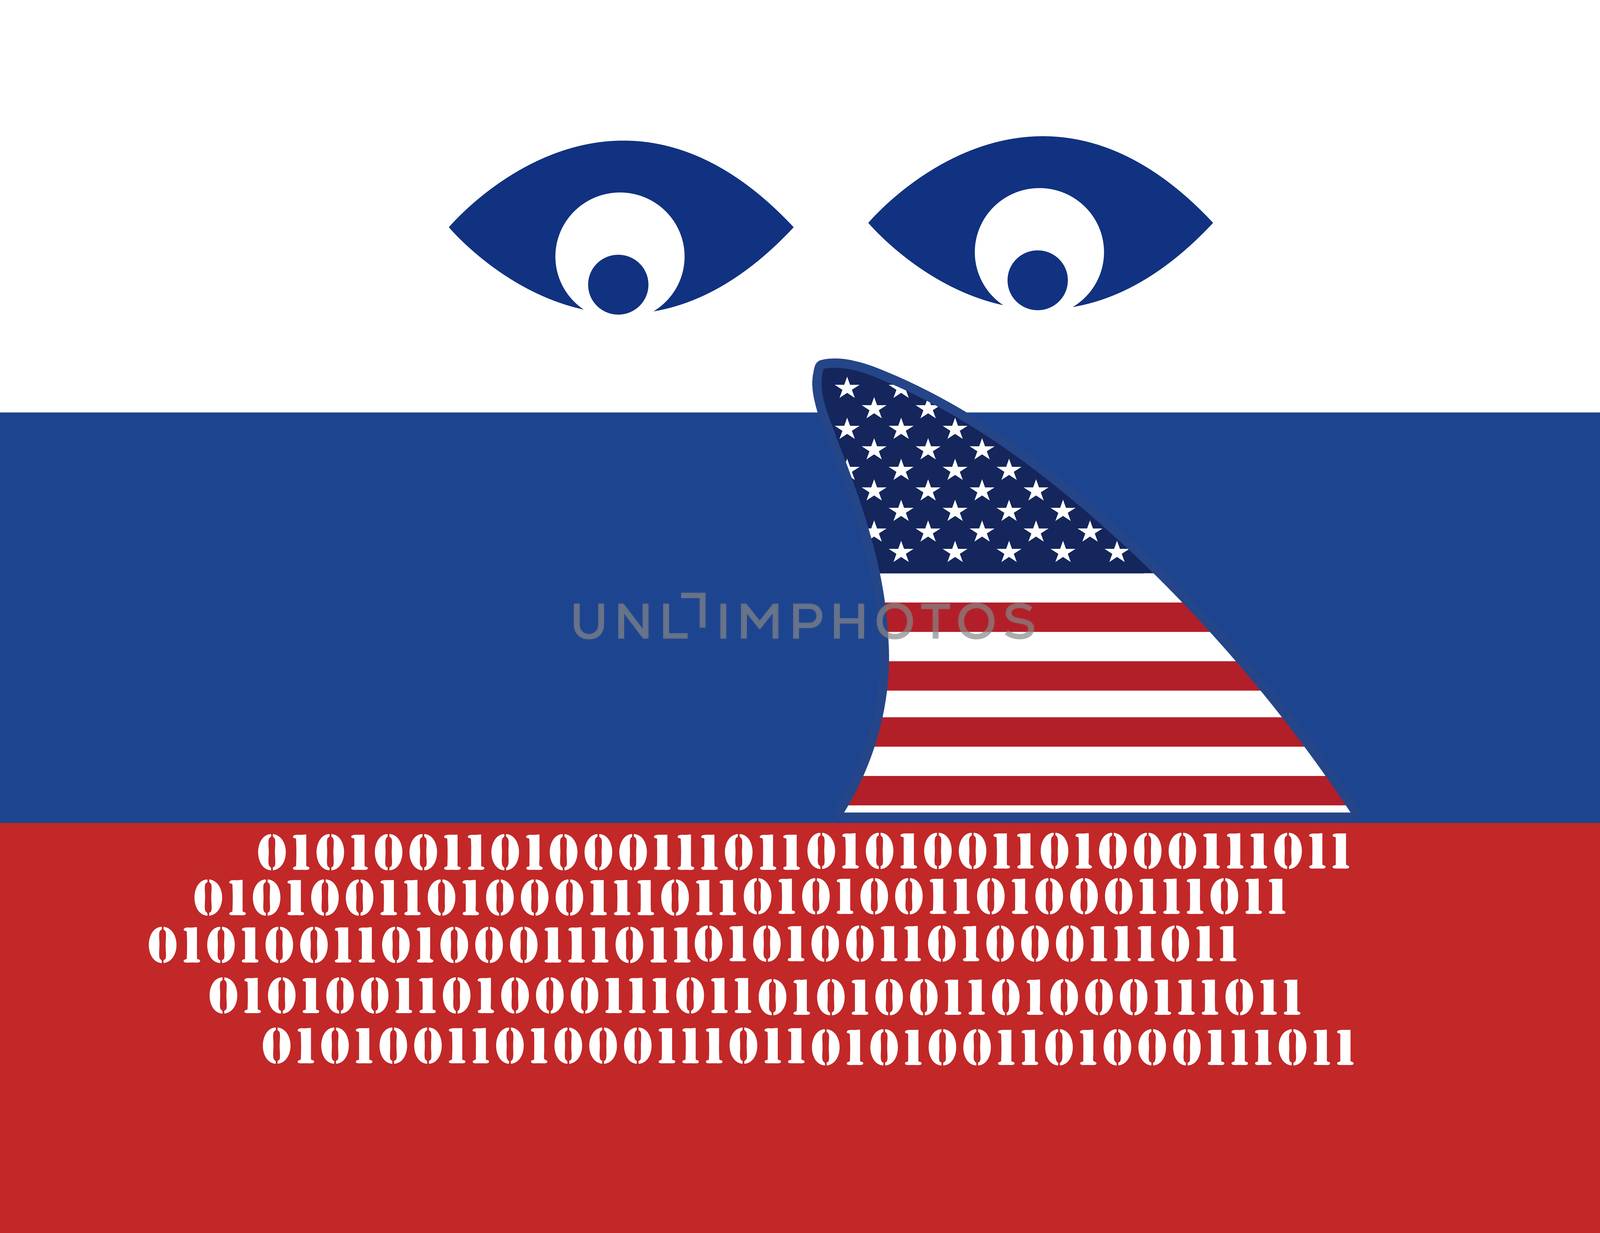 American espionage on Russian computer networks